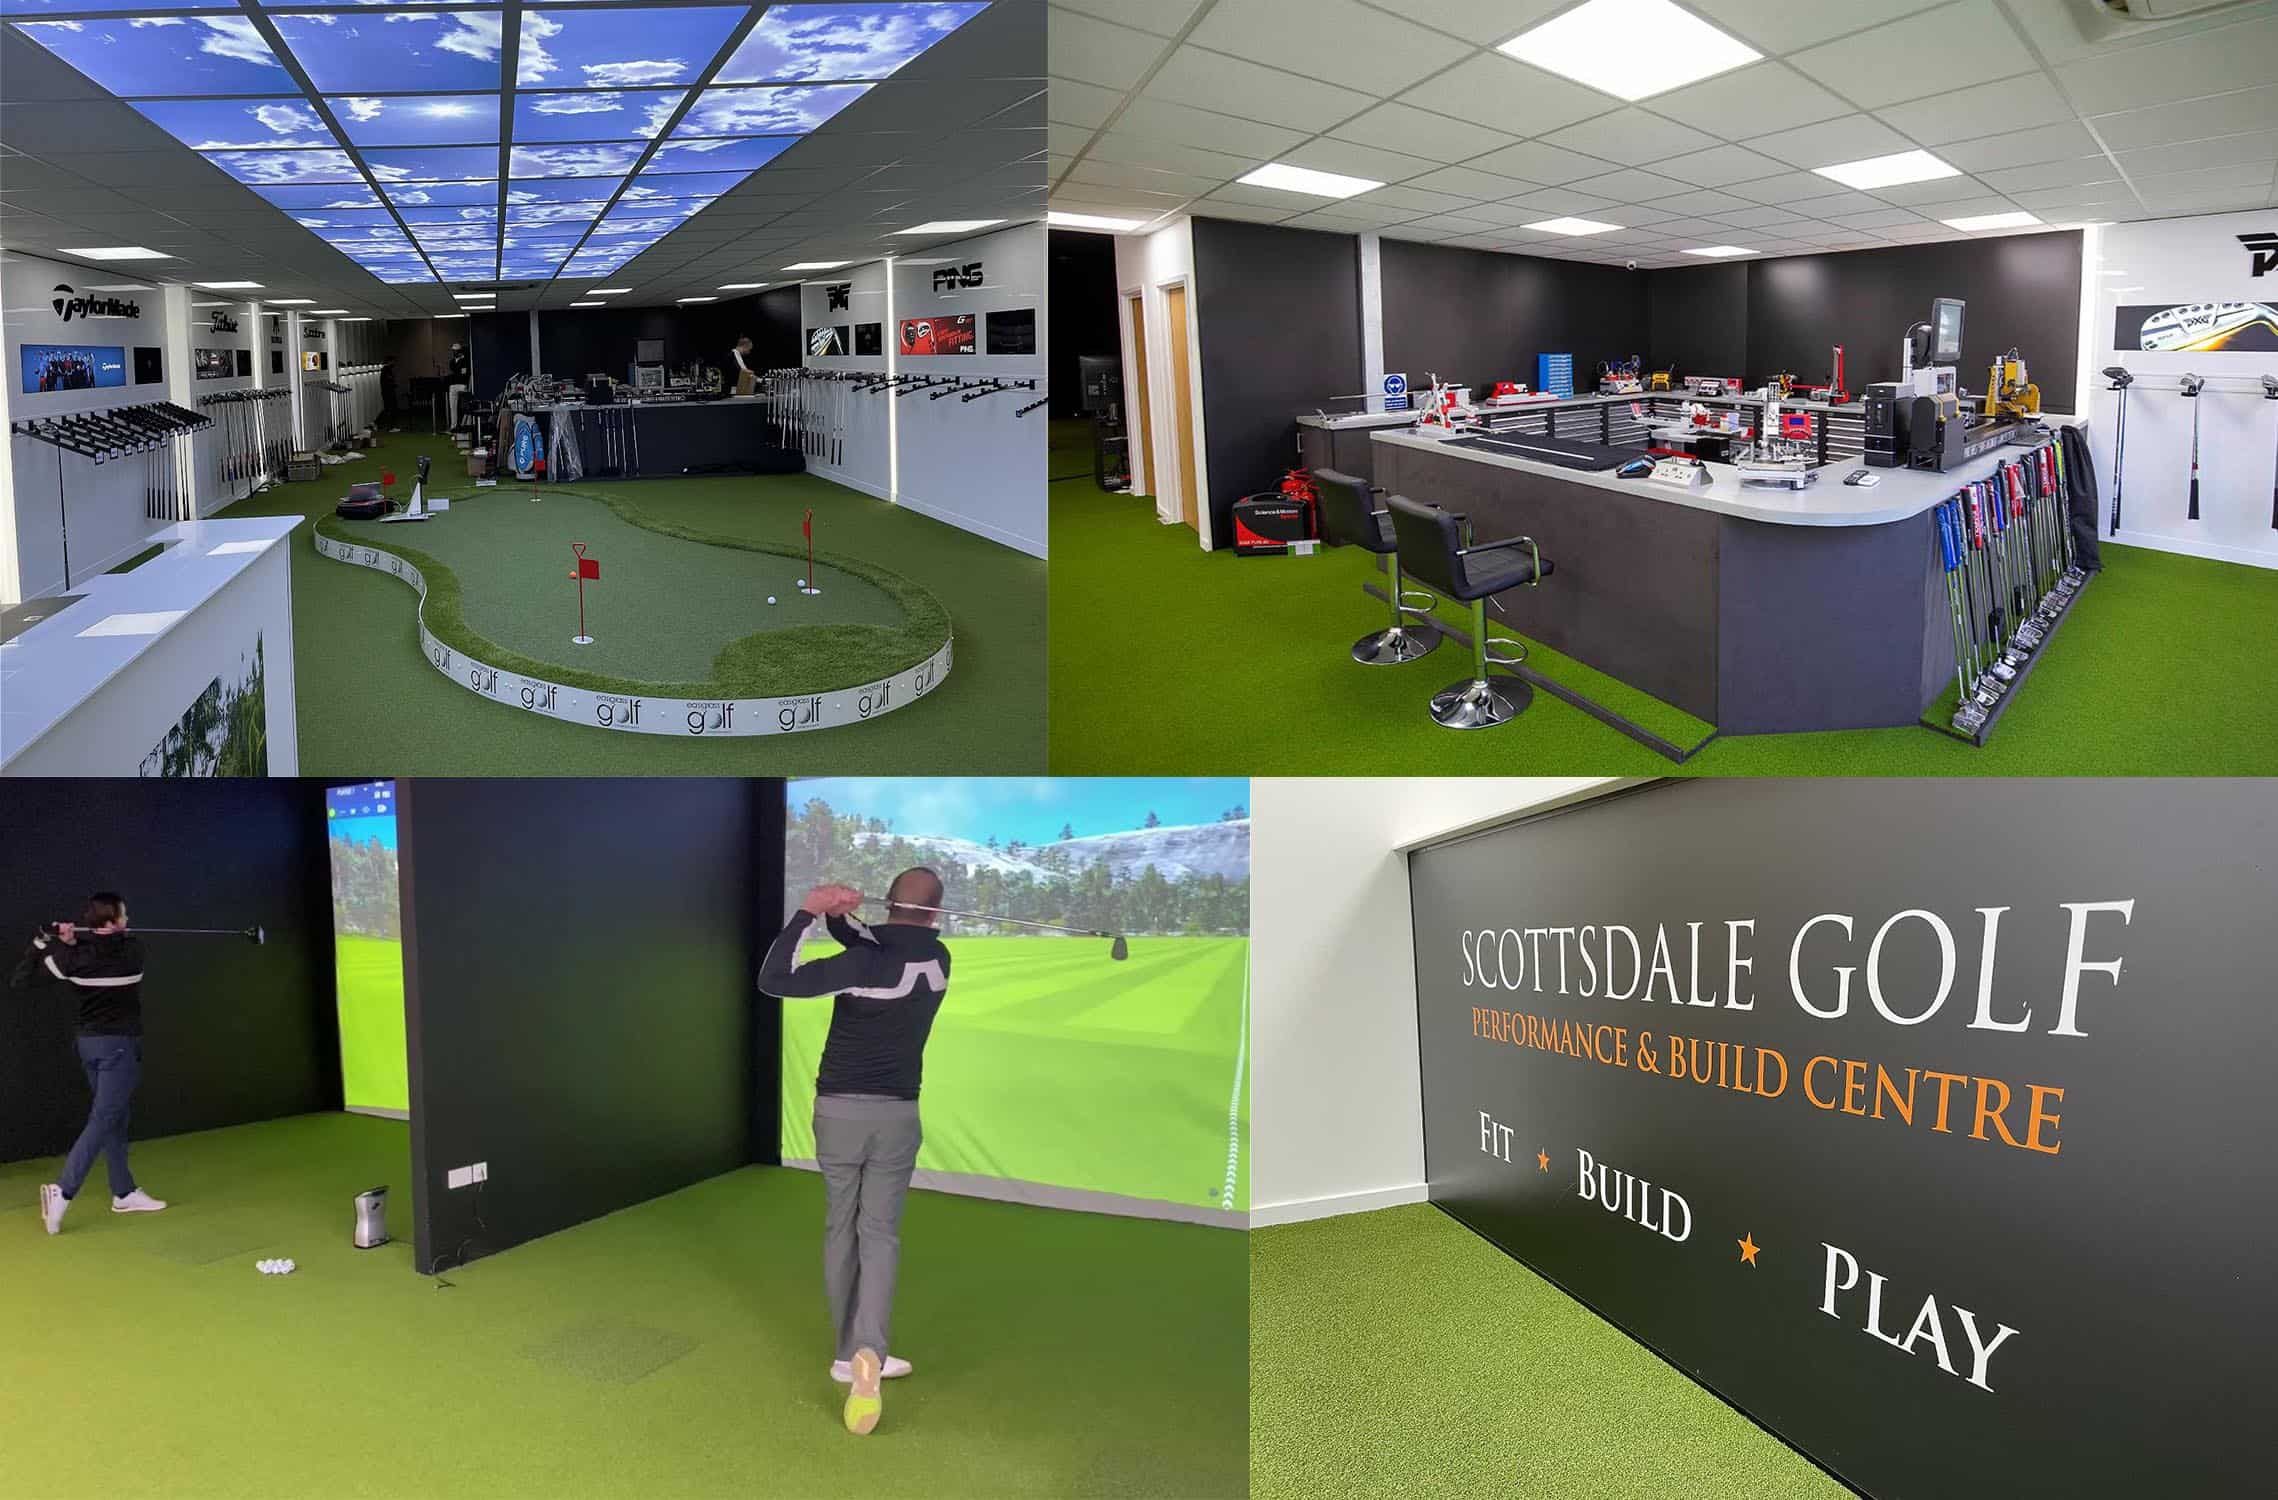 Scottdale putting green and golf simulator.